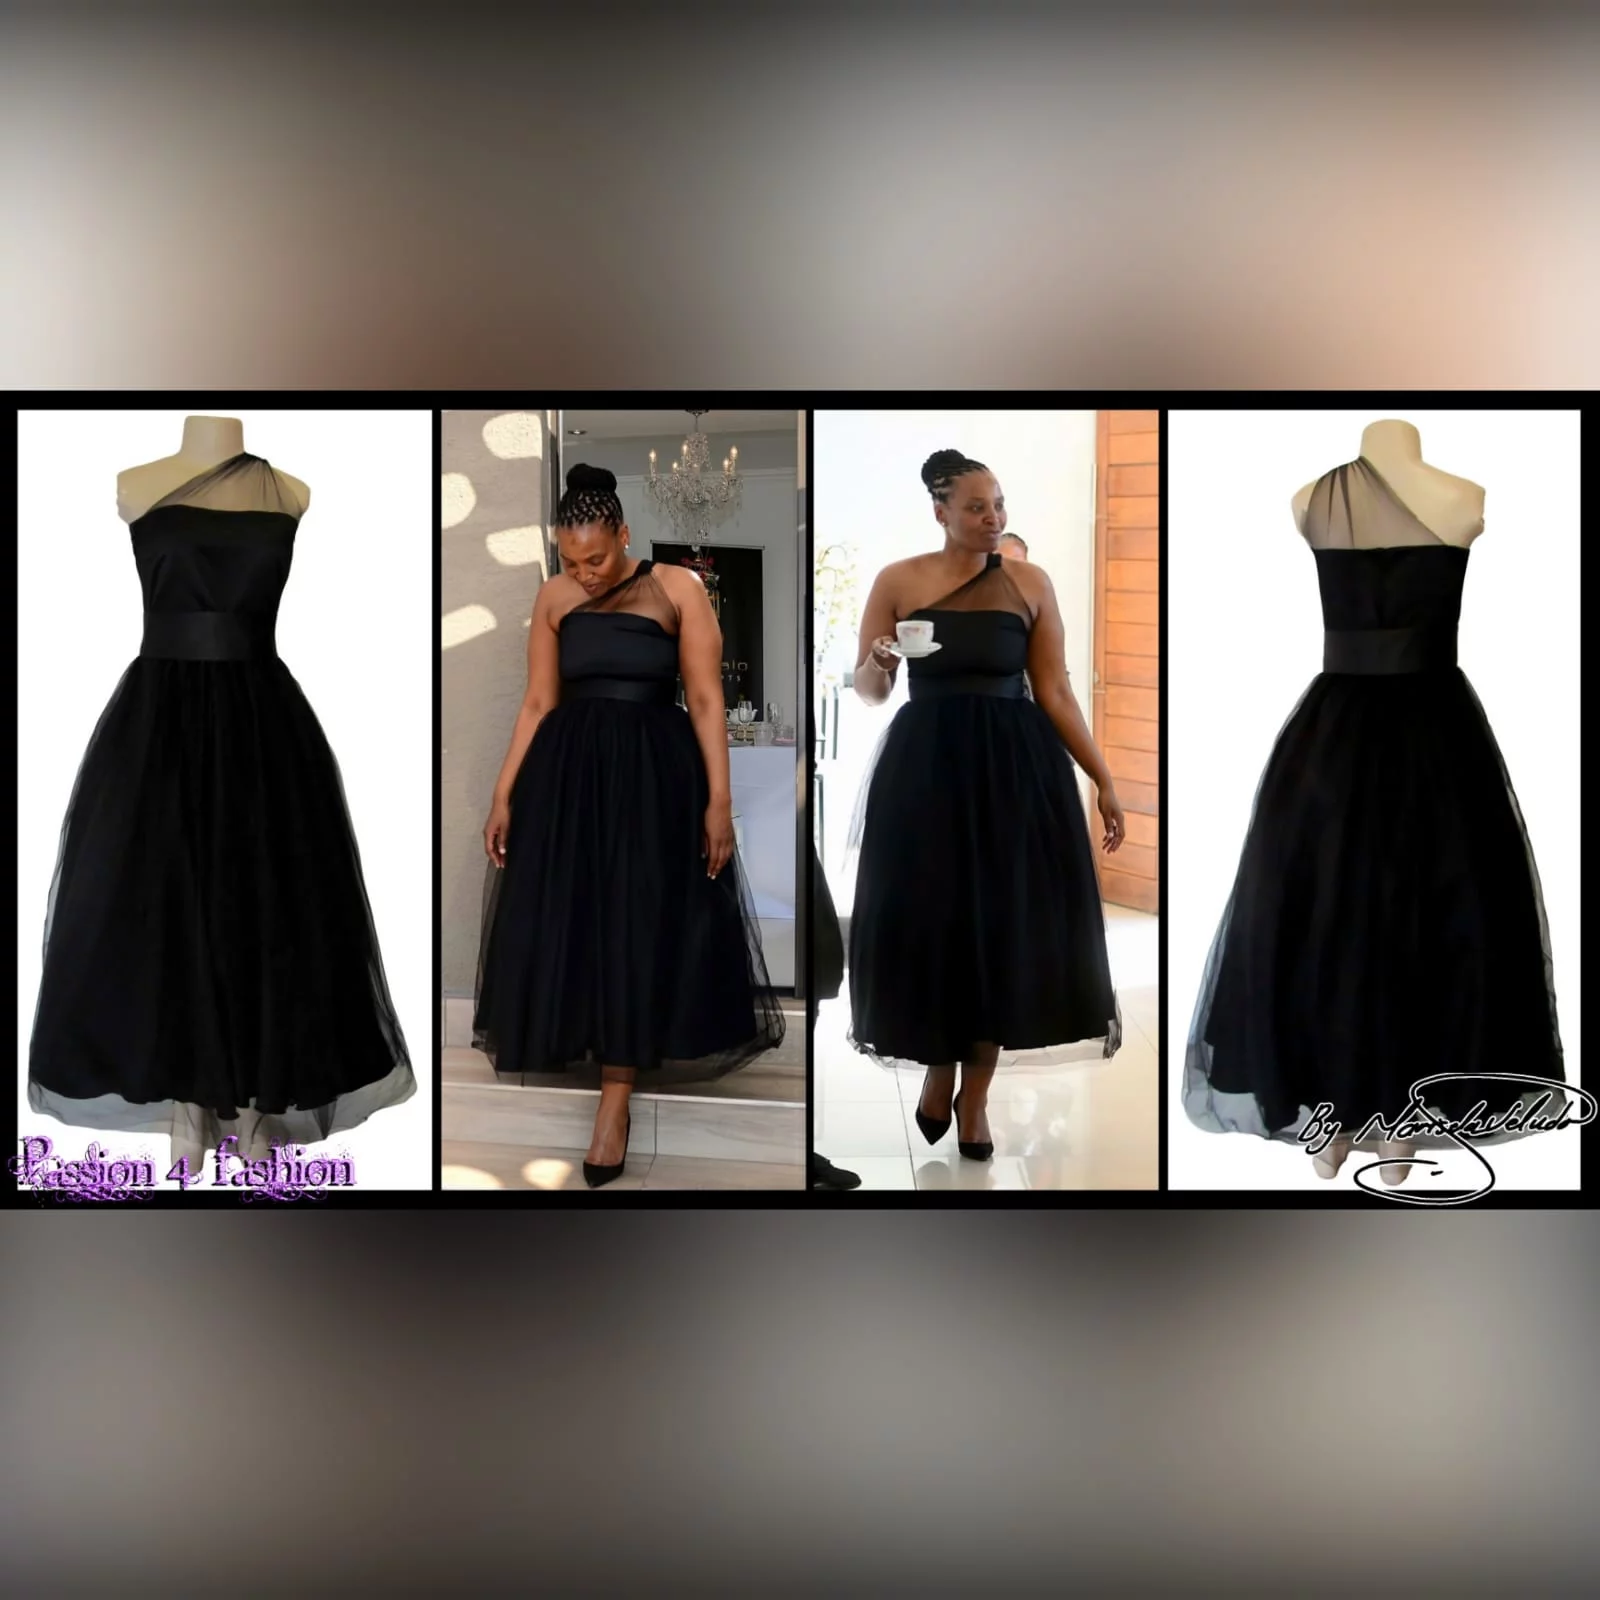 Back ankle length evening party dress 5 back ankle-length evening party dress, overlay with tulle, with a high waisted satin belt. Bodice with tulle creating a one-shoulder design